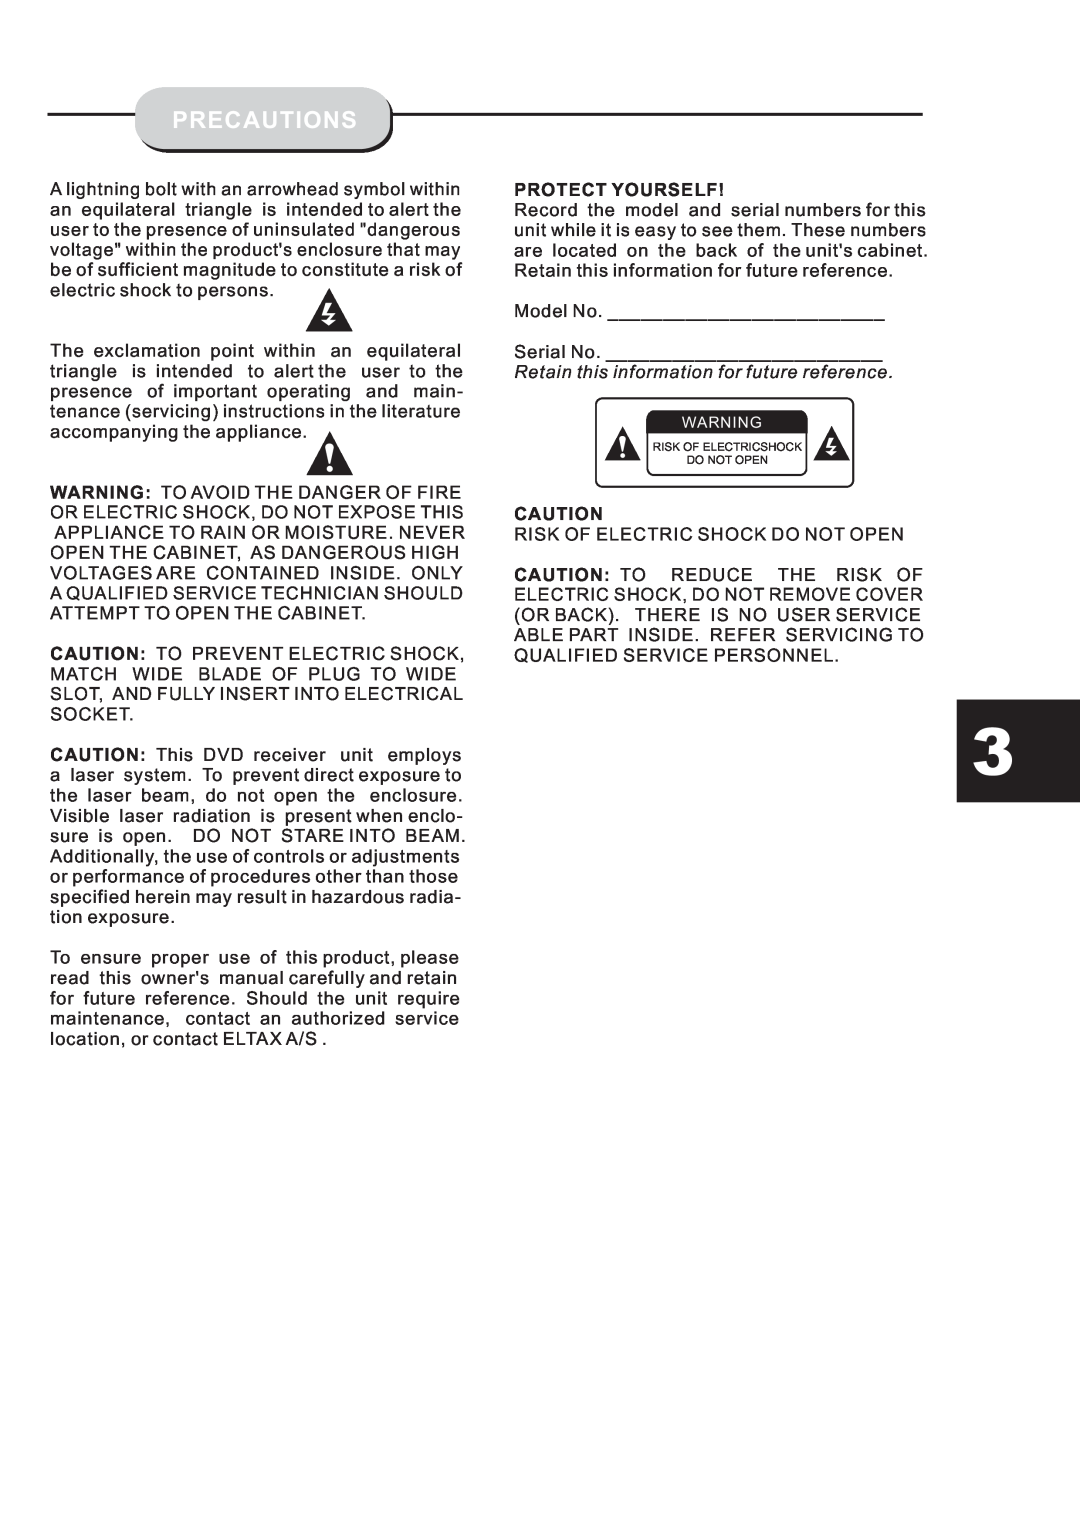 Eltax HT-153 instruction manual Precautions, Protect Yourself, Retain this information for future reference 